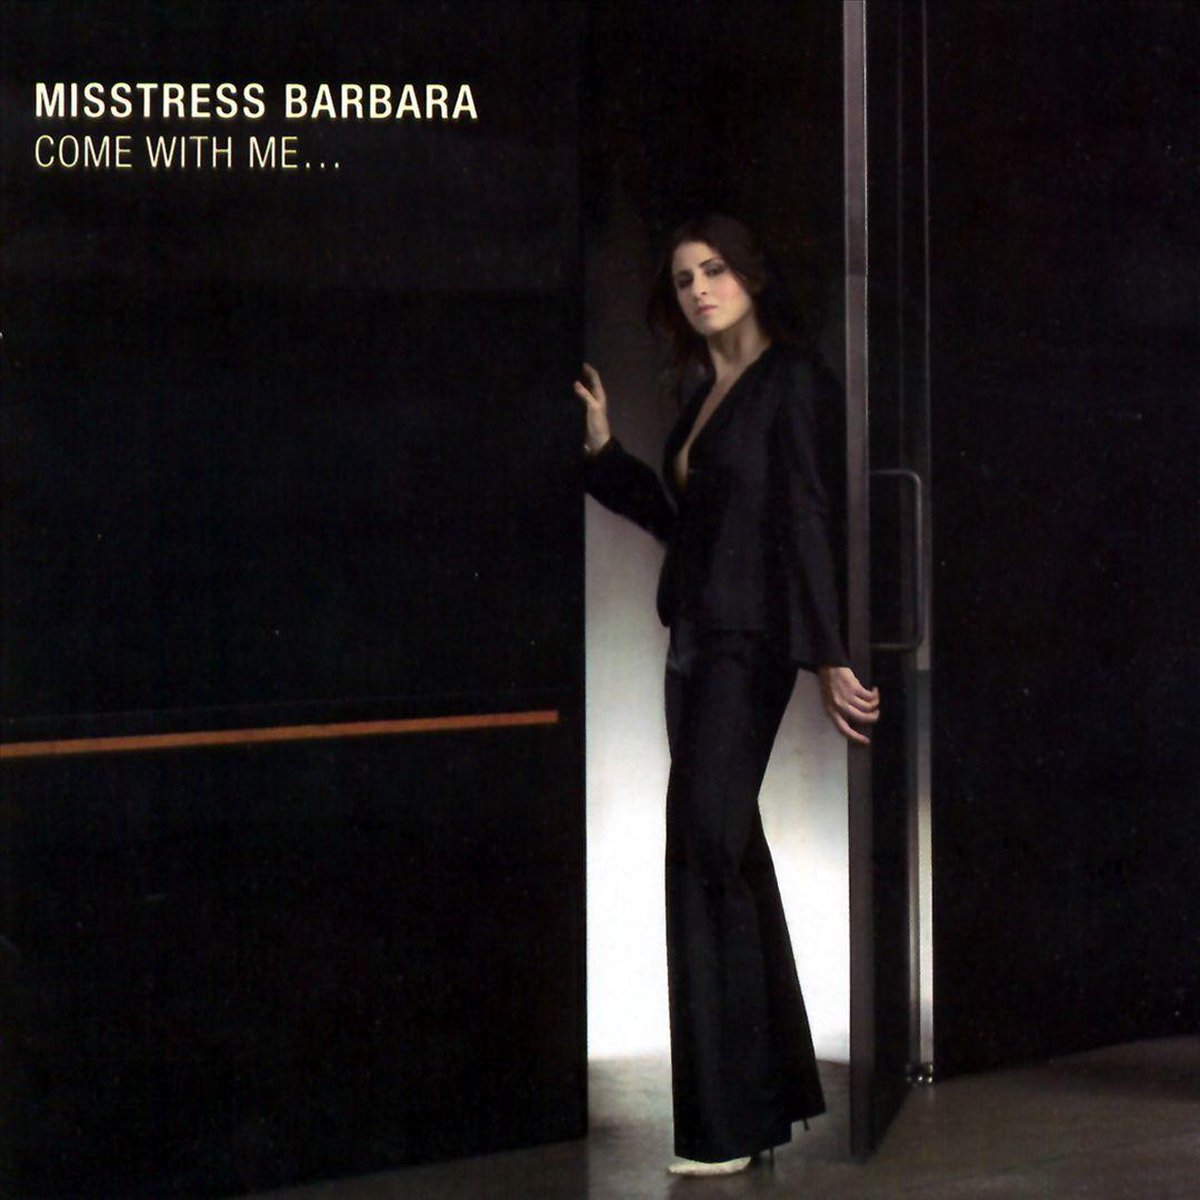 Come with Me... - Misstress Barbara